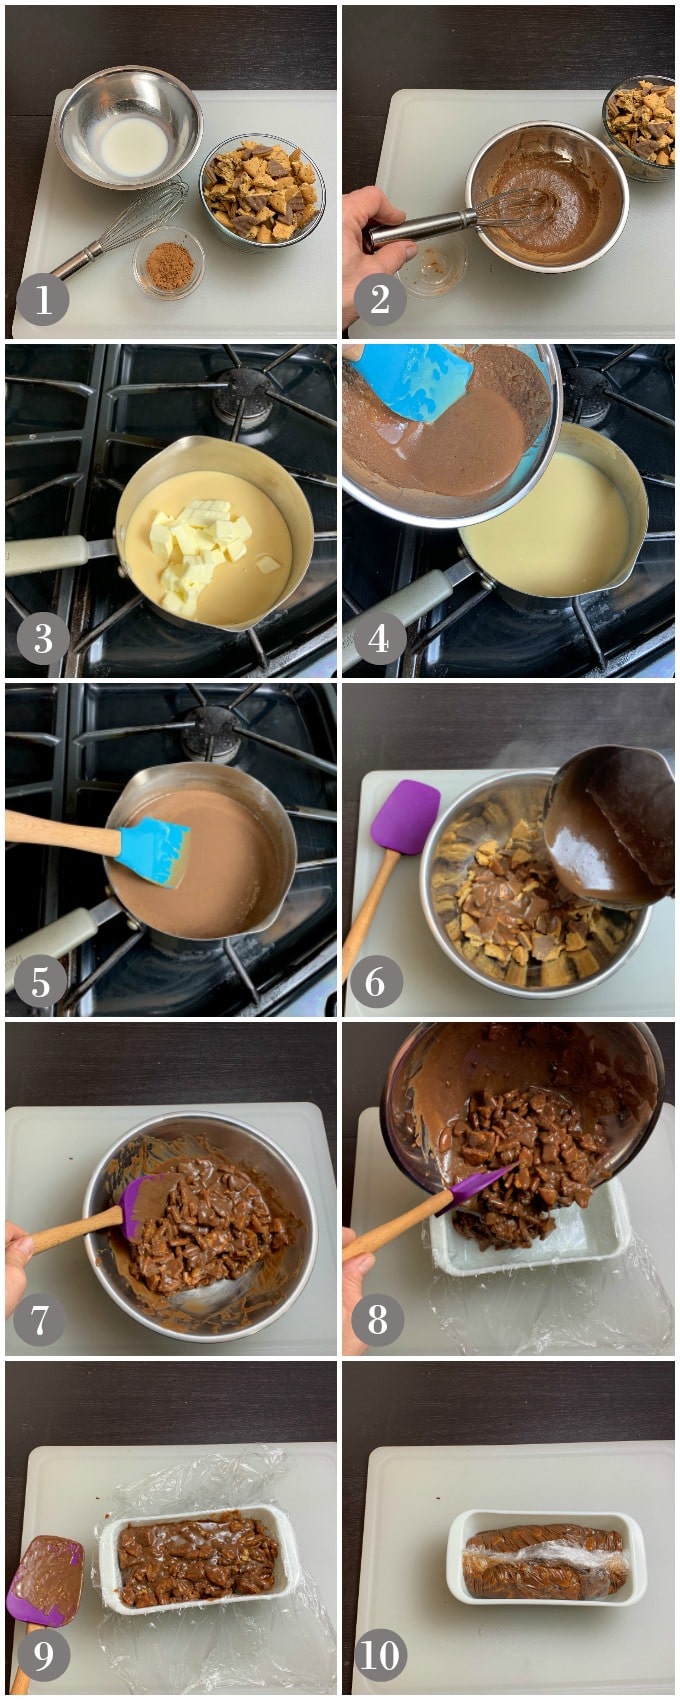 Collage of photos showing a bowl of crumbled digestive cookies and other ingredients to make tinginys cookies.